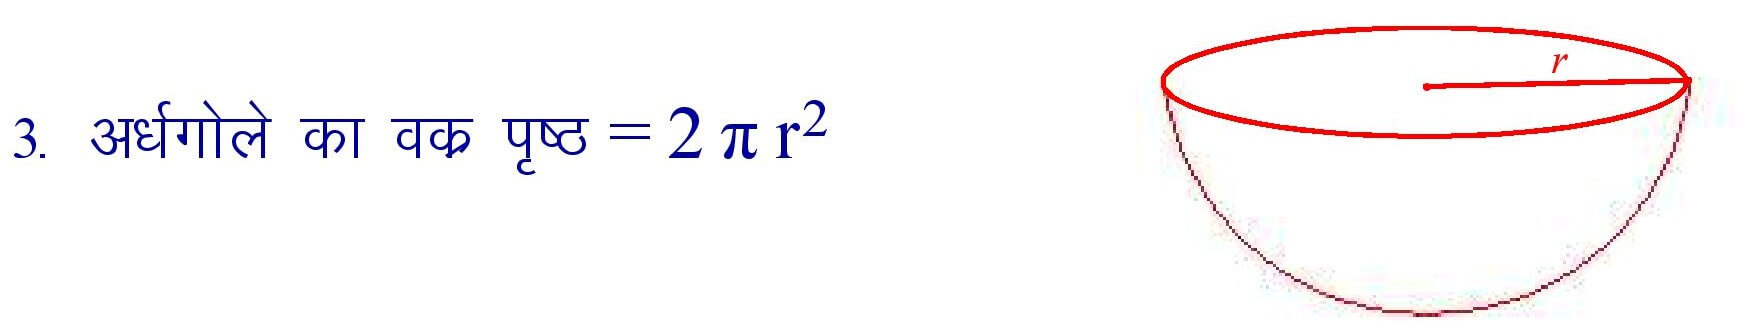 Curved surface area of hemisphere formula in hindi